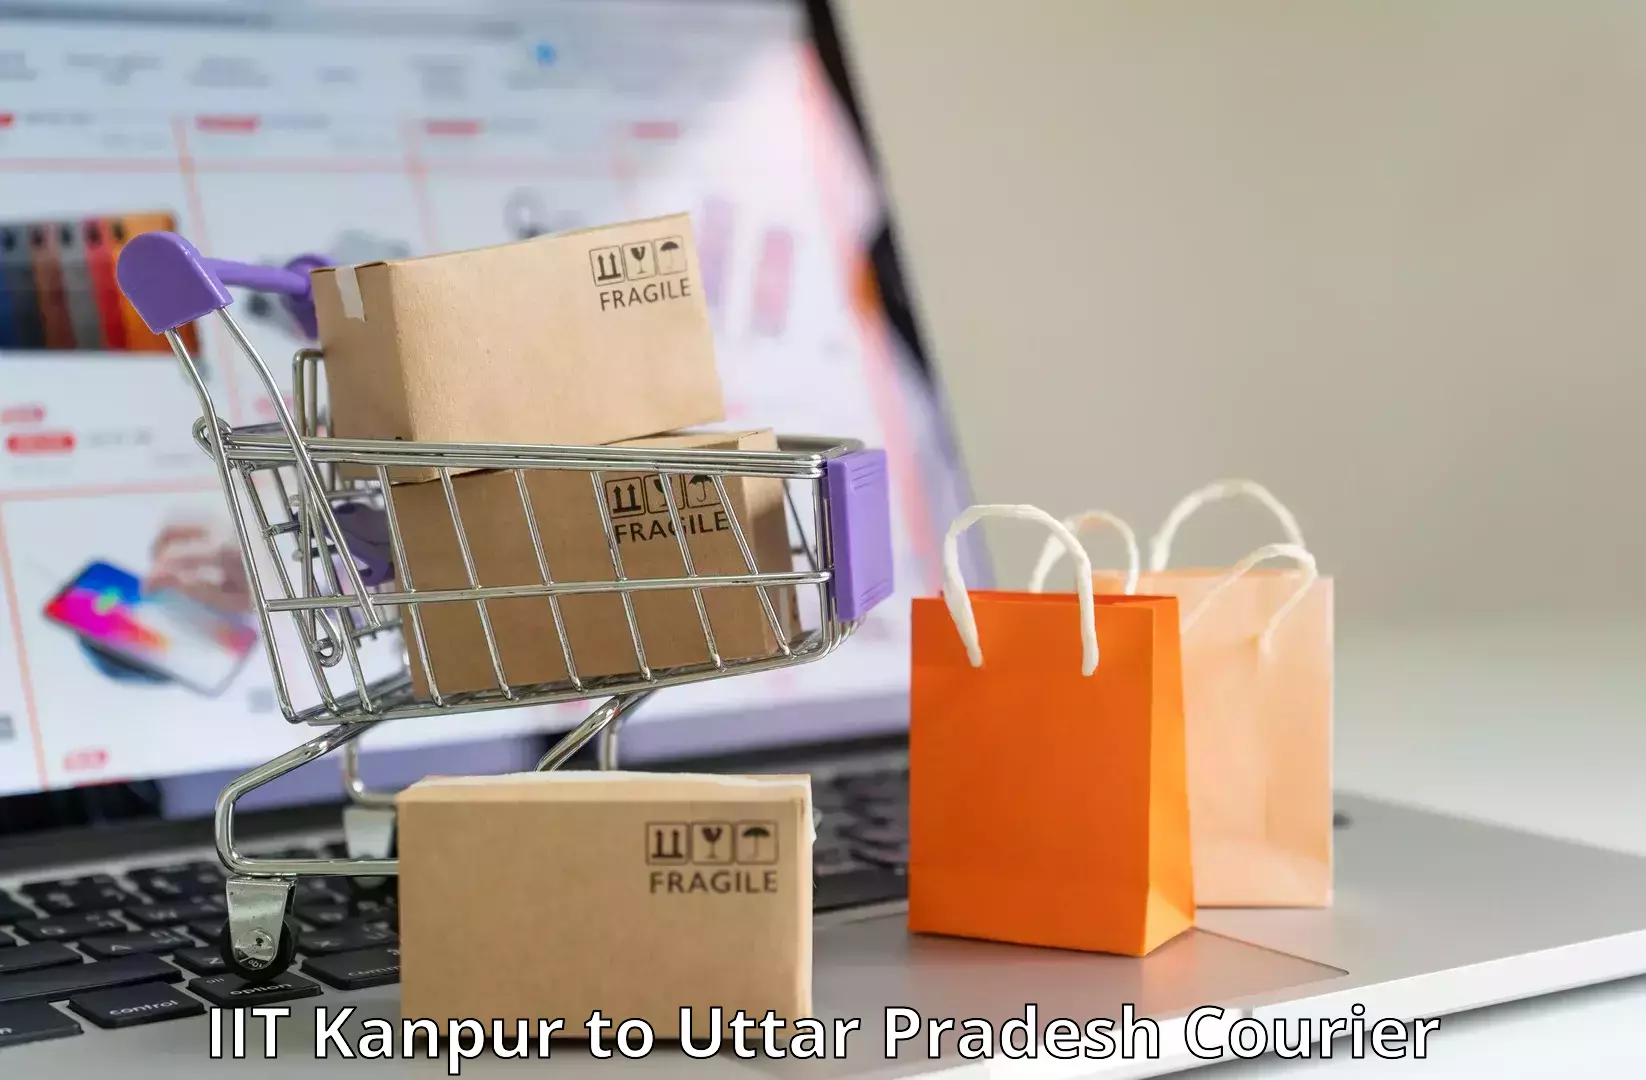 Express courier capabilities IIT Kanpur to Kheragarh